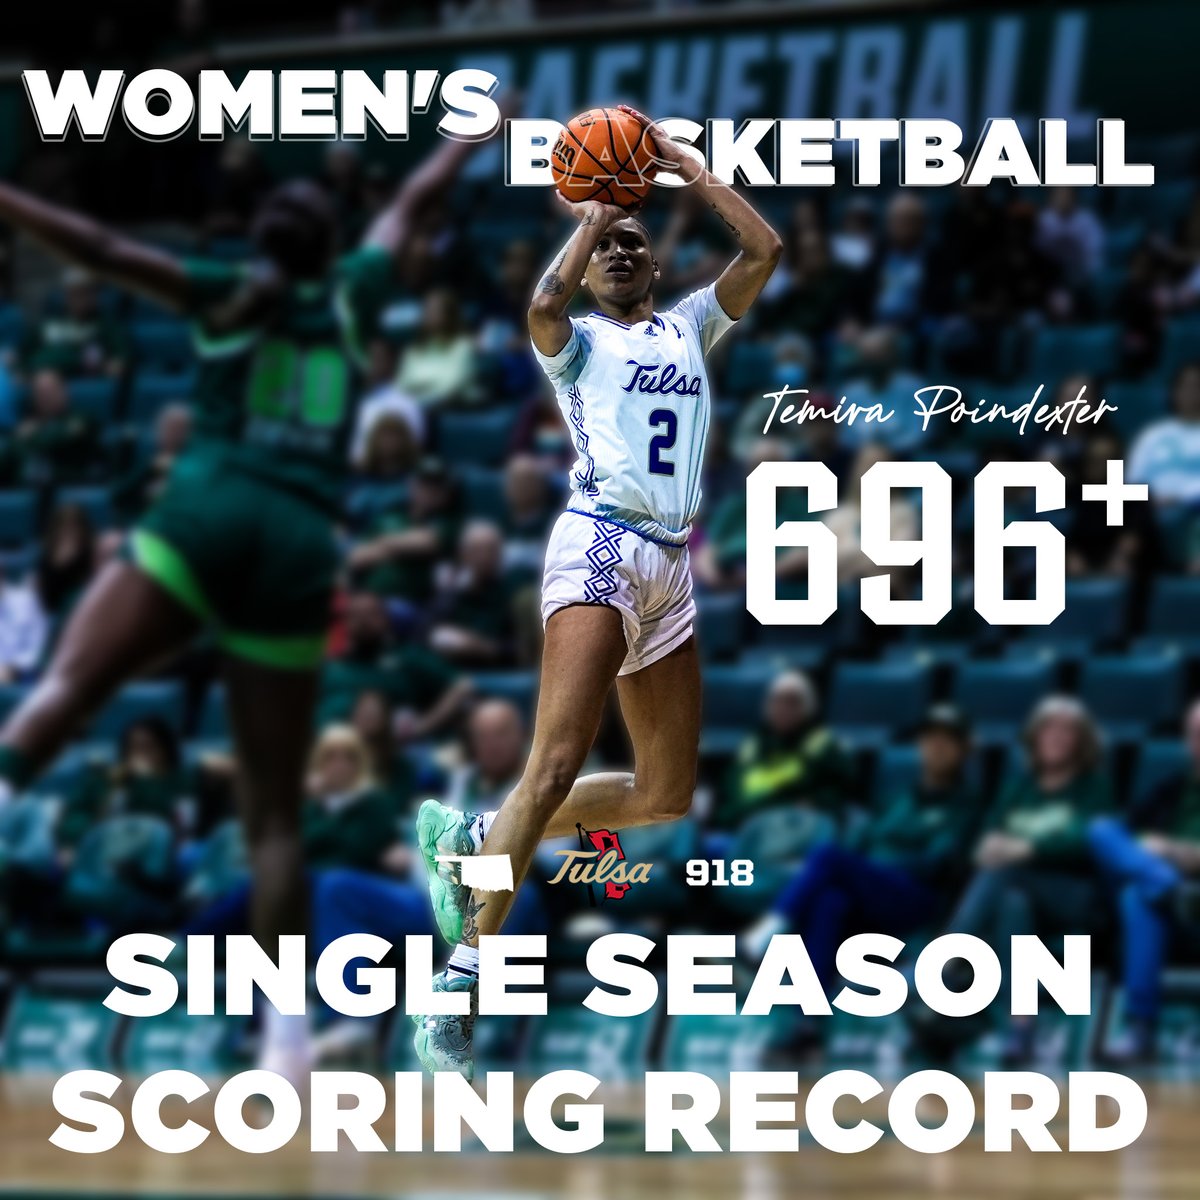 The best scoring season by a TU player has been cemented 🙌 696 points AND COUNTING puts @tPoindexter21 ahead of Allison Curtin's record of 692 points set in 2002-03. #LoveTrustWork | #ReignCane